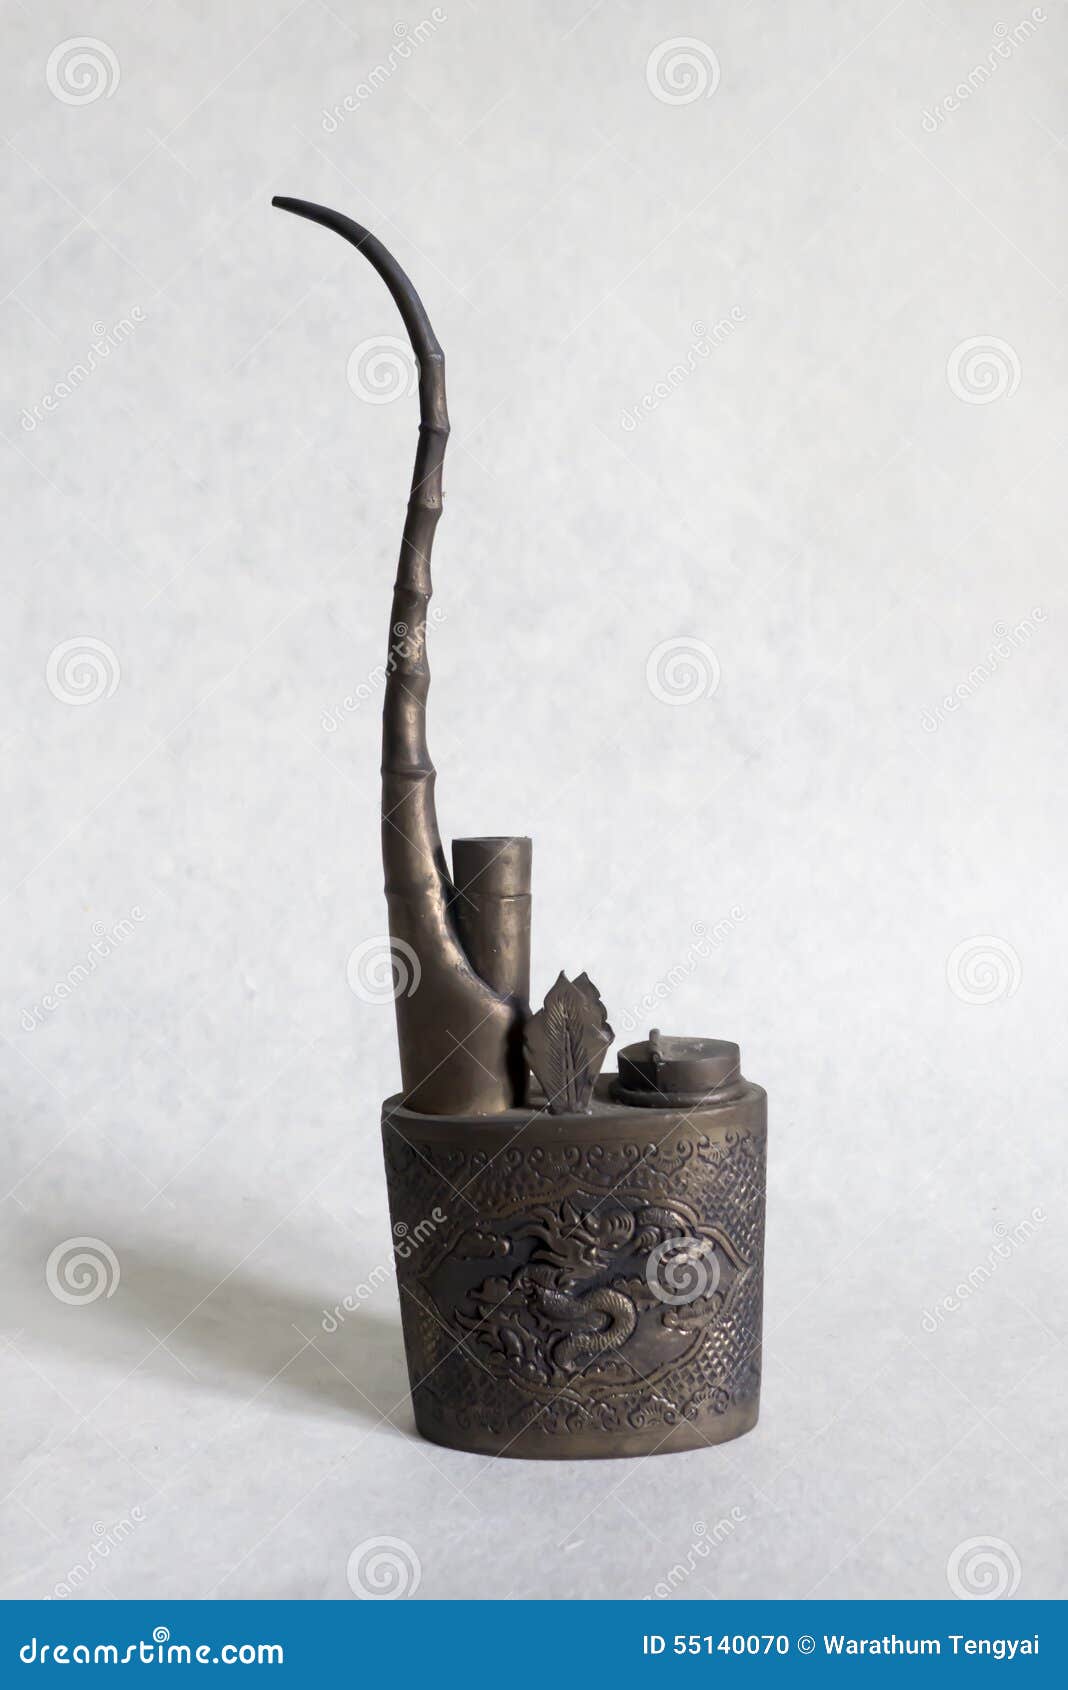 Water pipe for smoking opium or tobacco